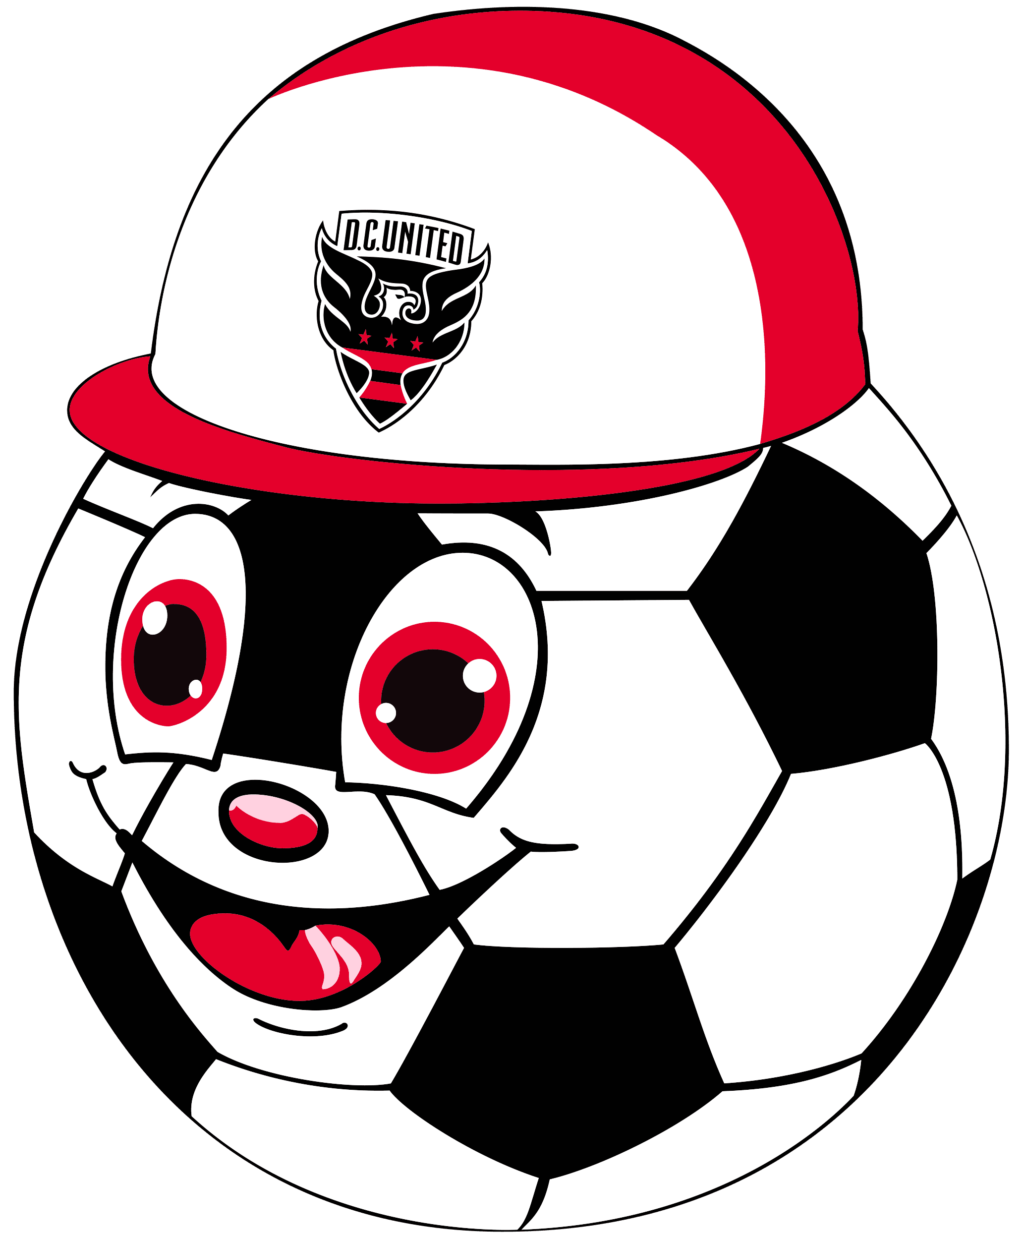 dc united 17 MLS Logo DC United, DC United SVG, Vector DC United, Clipart DC United, Football Kit DC United, SVG, DXF, PNG, Soccer Logo Vector DC United, EPS download MLS-files for silhouette, files for clipping.